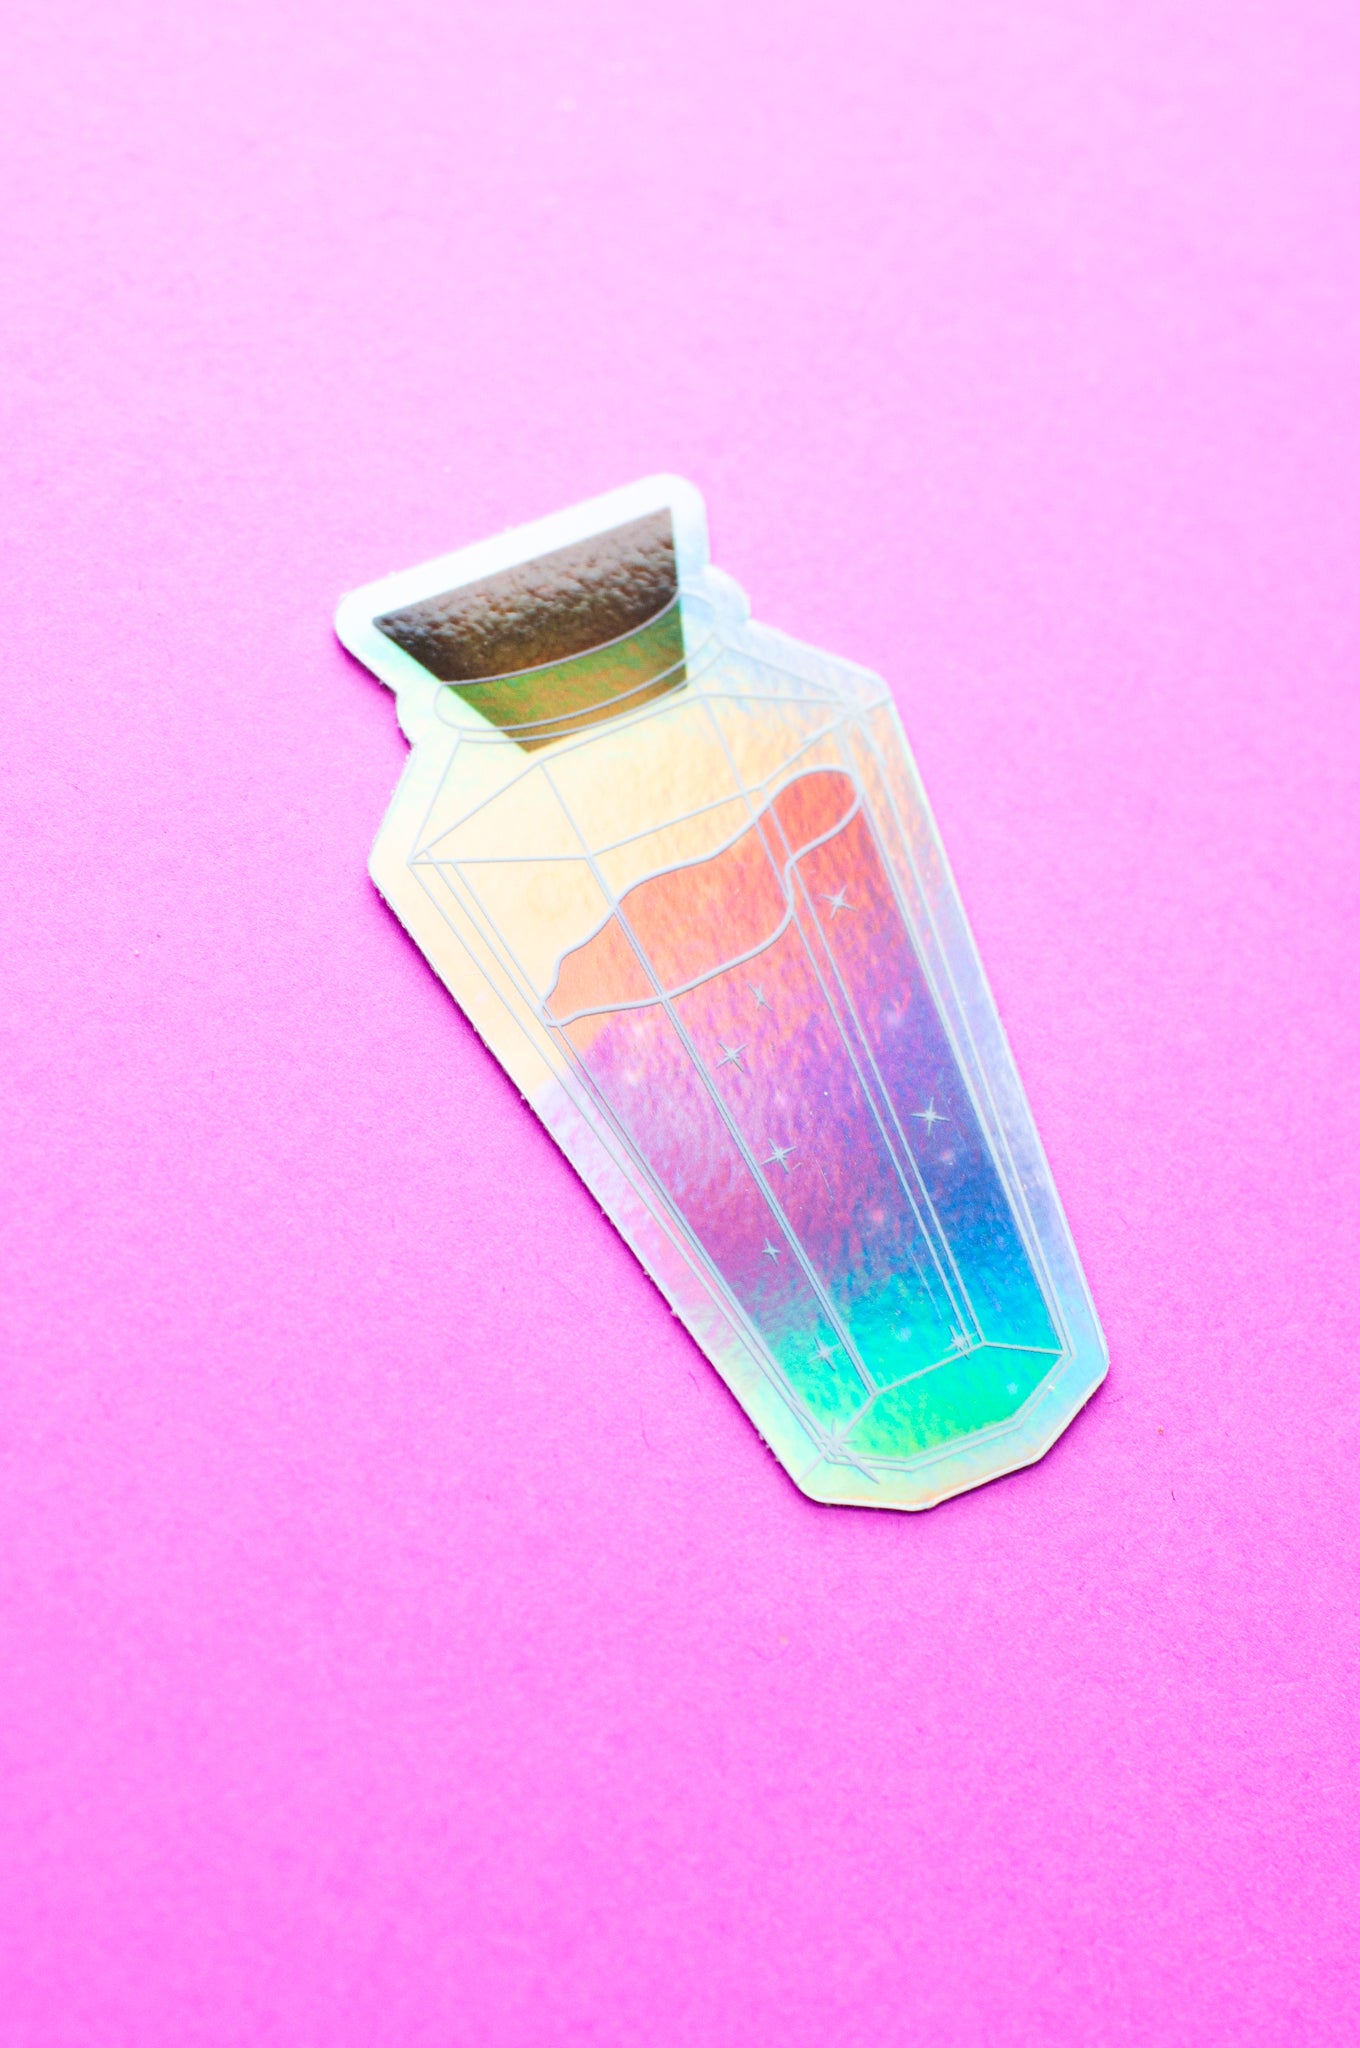 Potion Bottle the Second